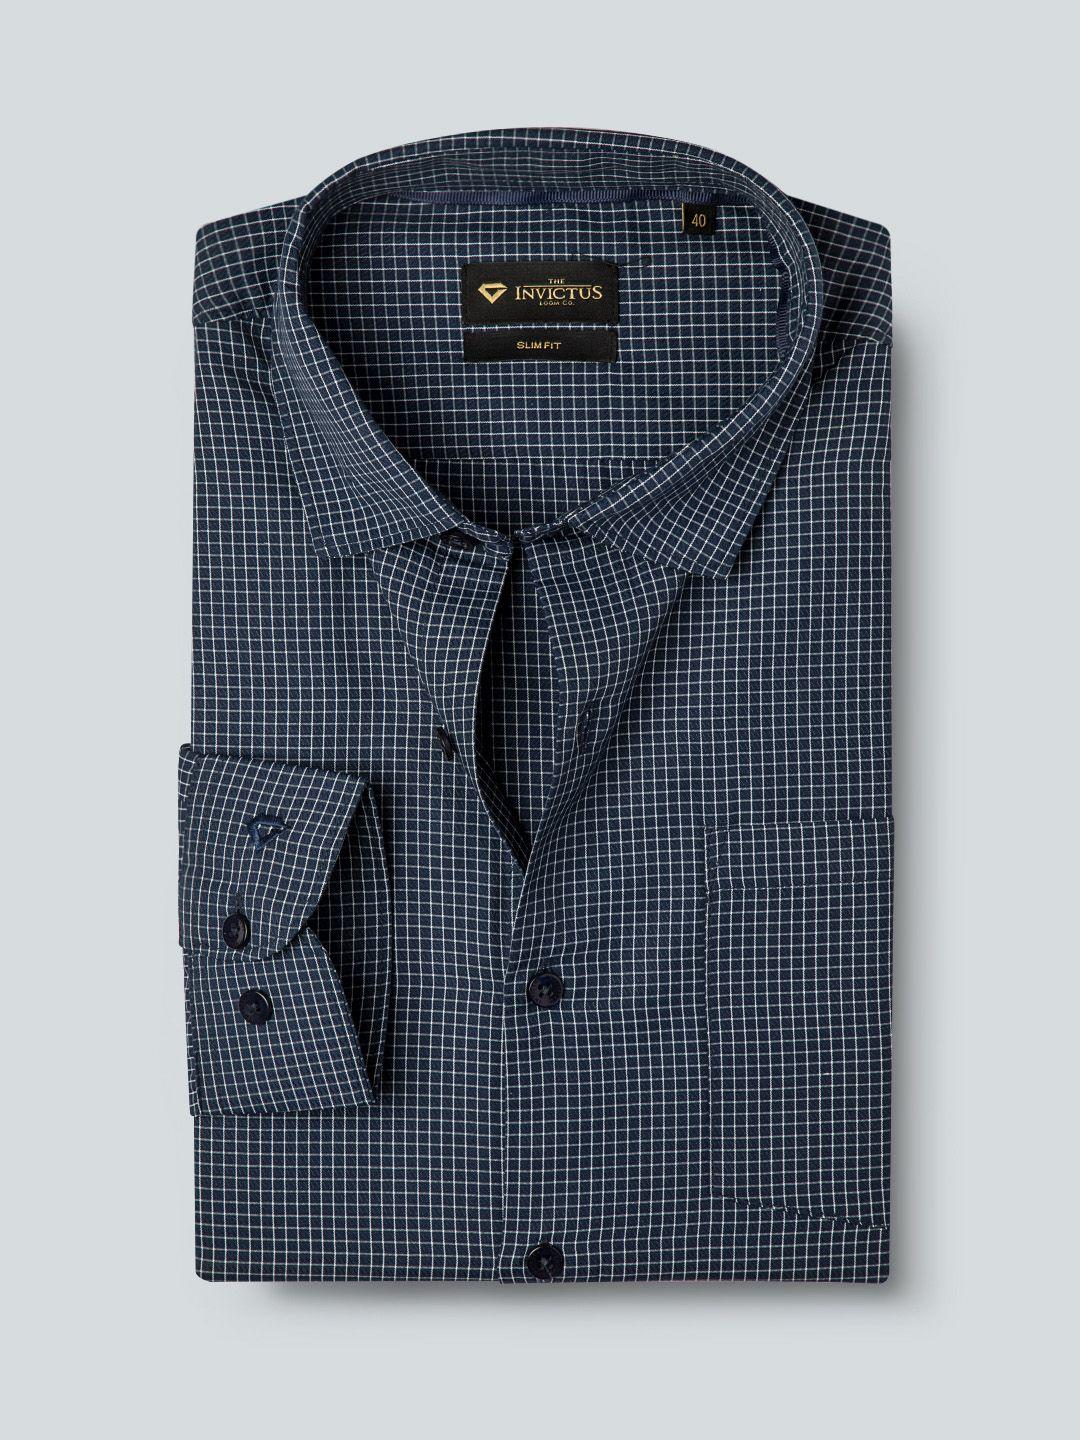 invictus-men-easy-care-navy-blue-&-white--checked-formal-shirt